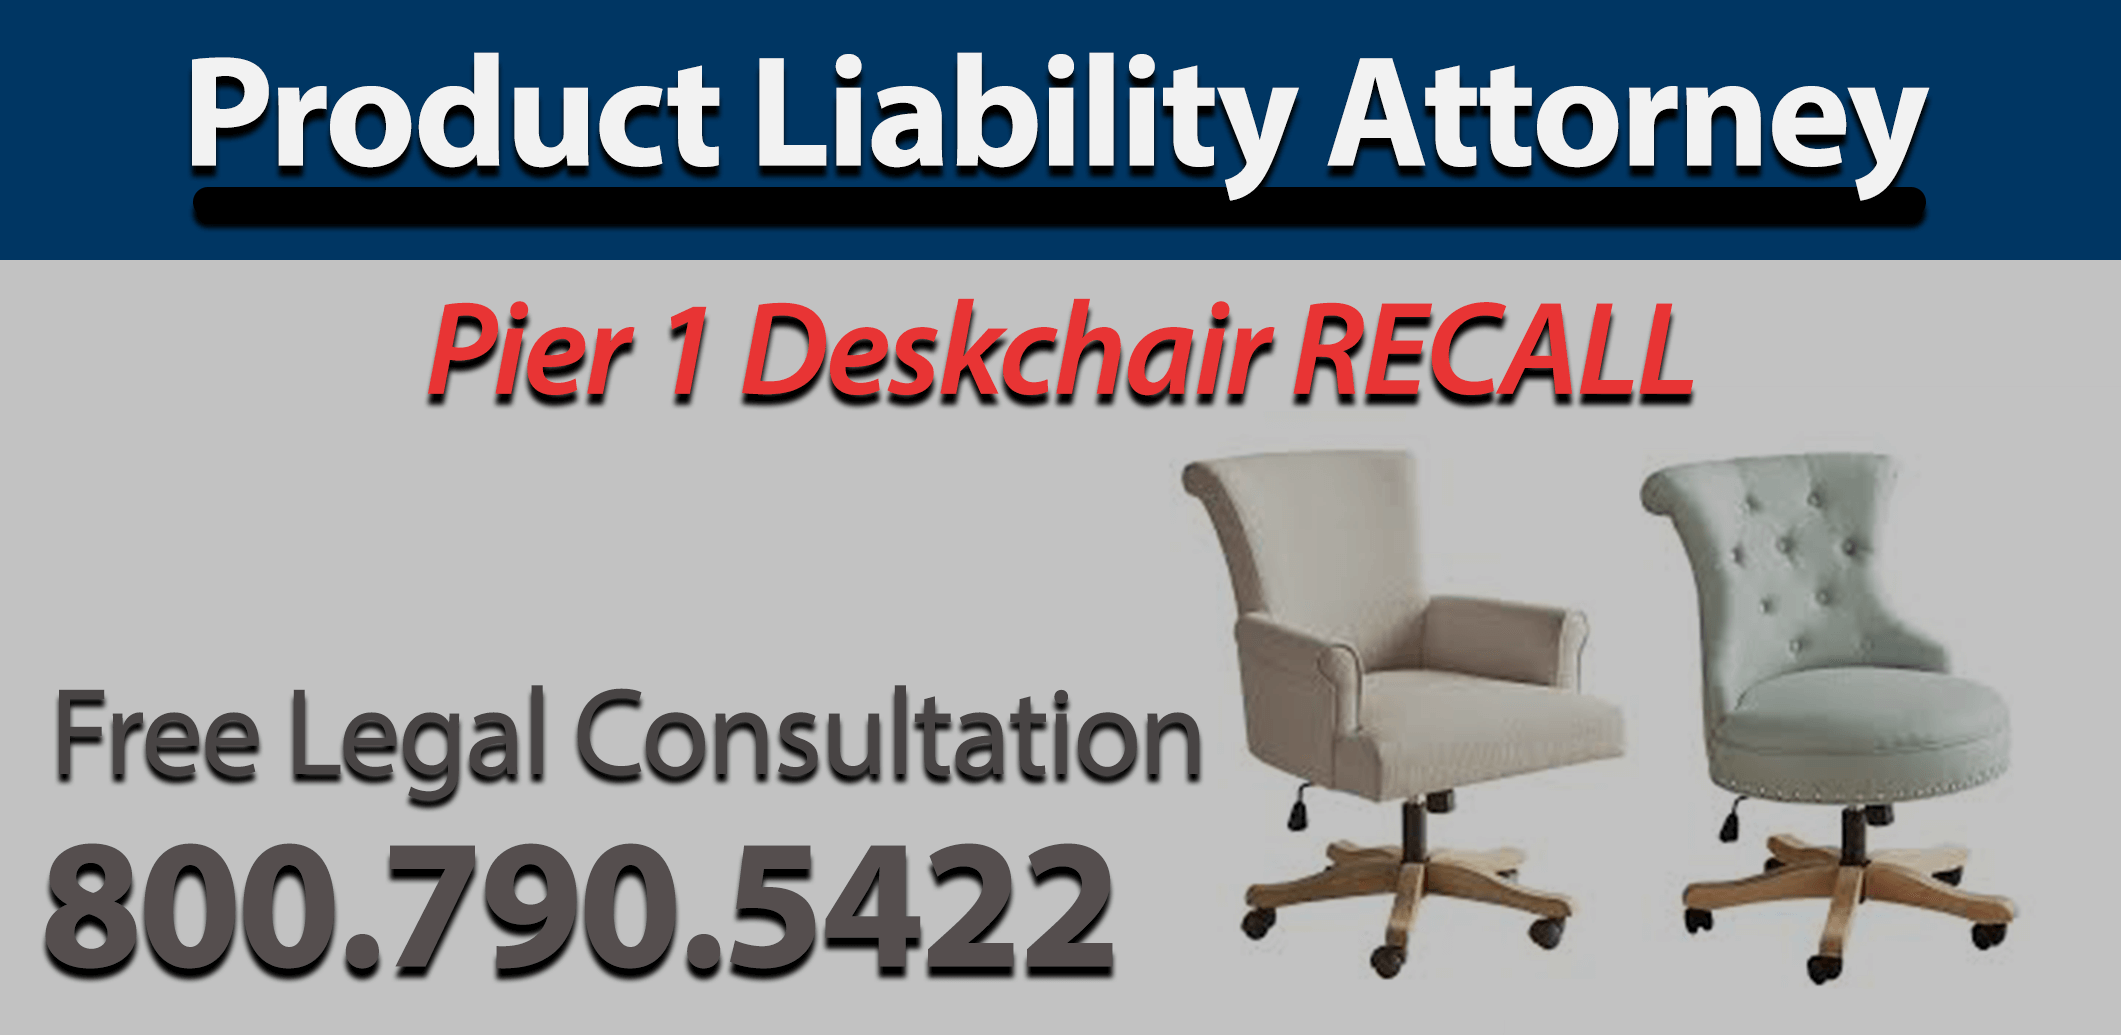 Pier1 desk chair product liability attorney malfunction injury sprain dislocation concussion claim sue design flaw compensation negligence